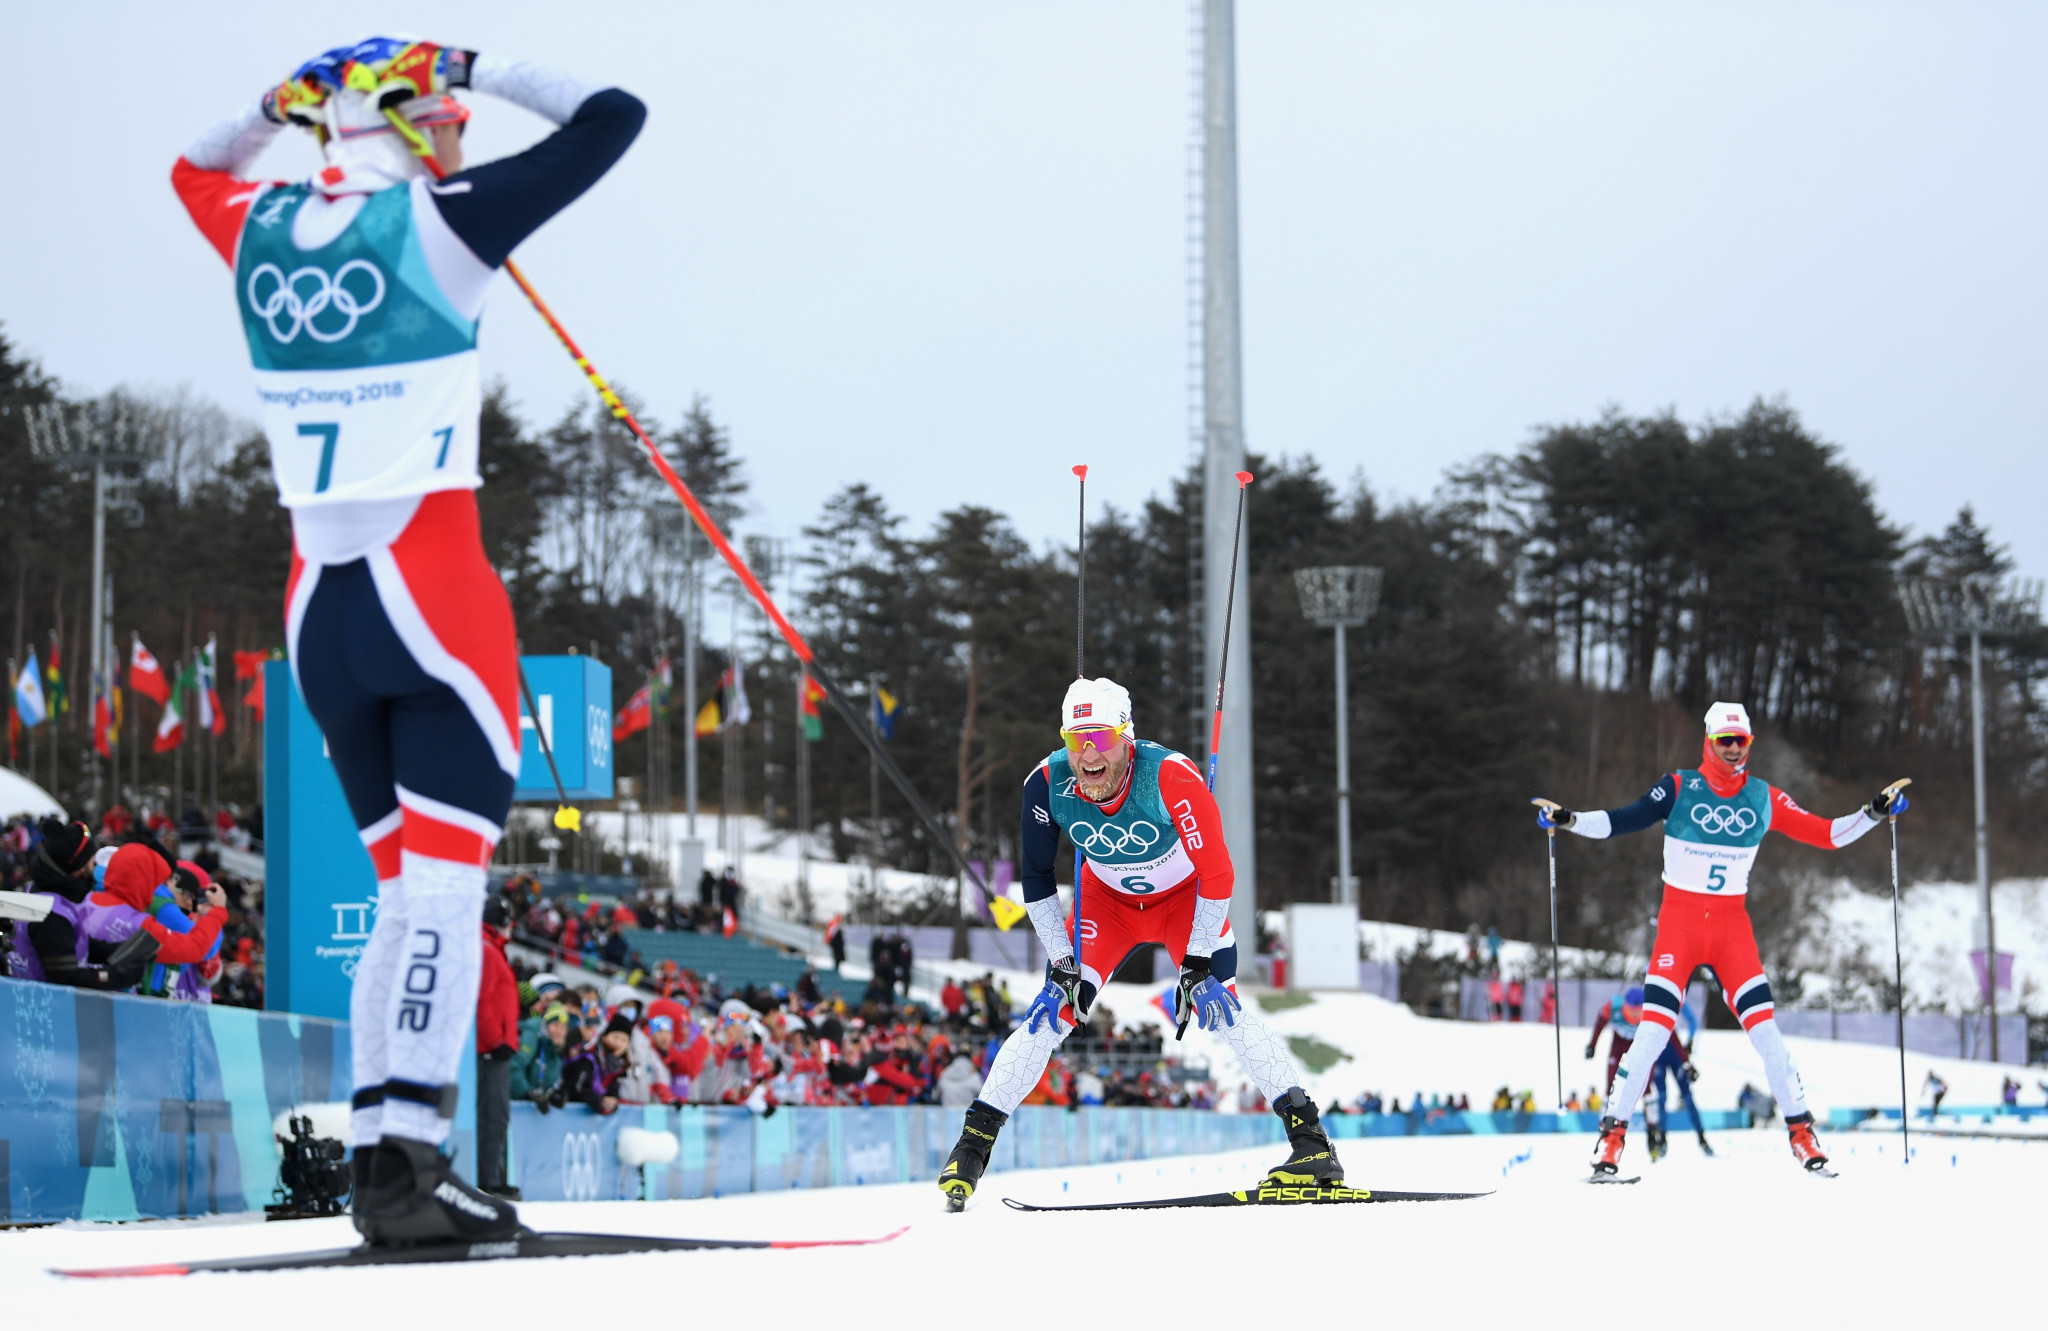 Simen Hegstad Krüger waits for team-mates Martin Johnsrud Sundby and Hans Christer Holund as Norway completed a cleansweep in the men’s 15 kilometres + 15km skiathlon ©Getty Images